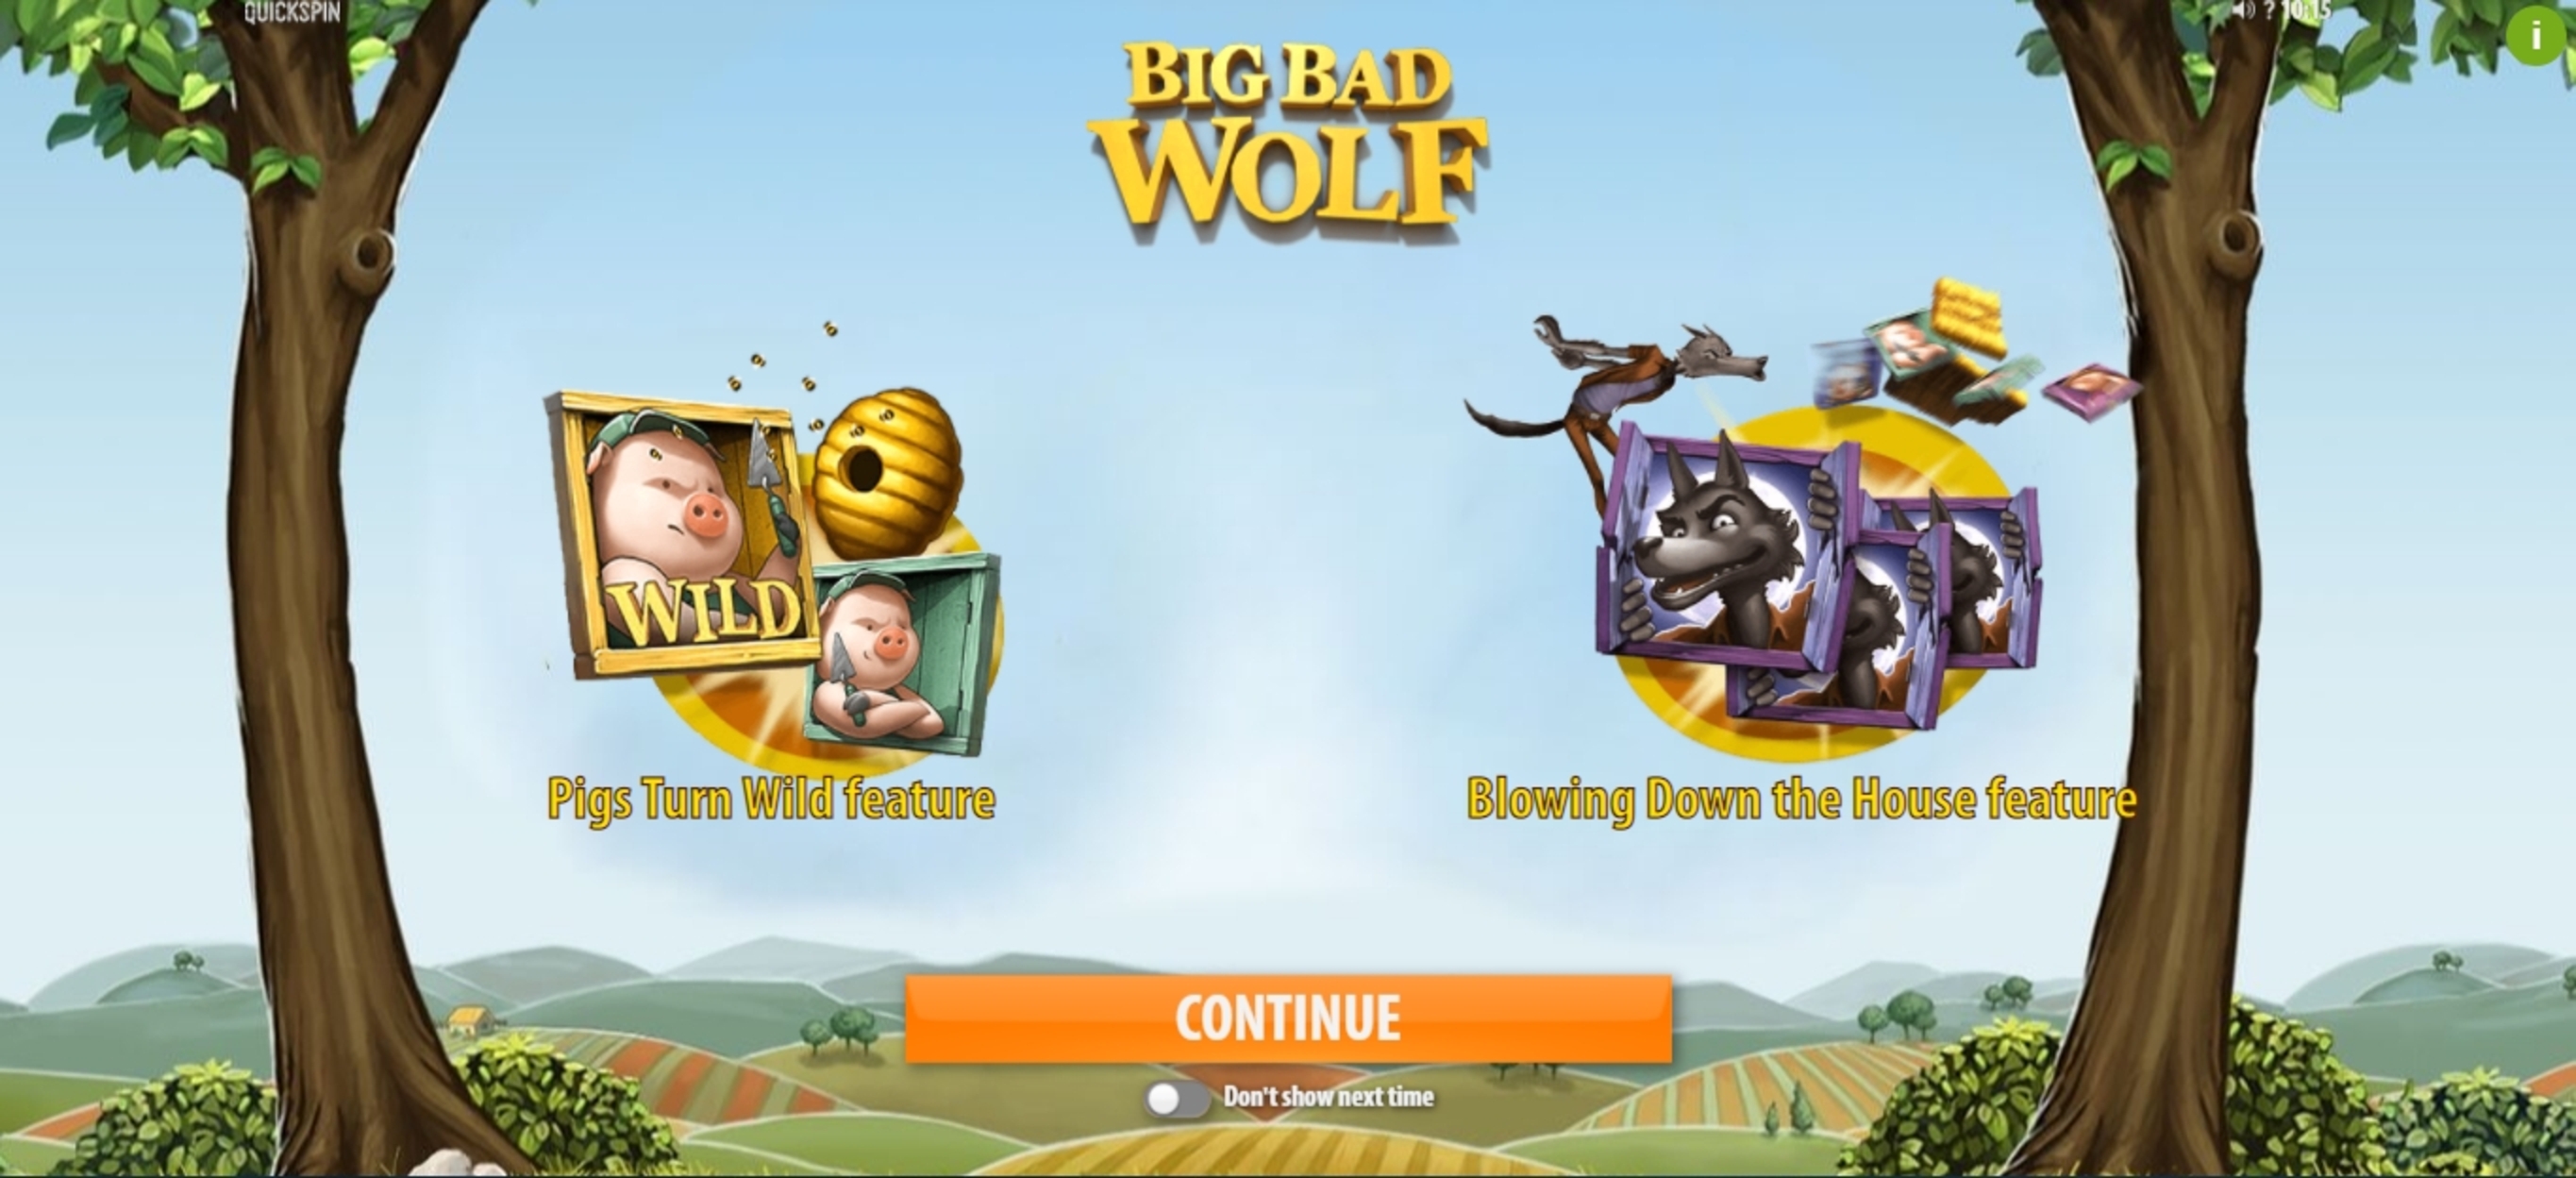 Play Big Bad Wolf Free Casino Slot Game by Quickspin